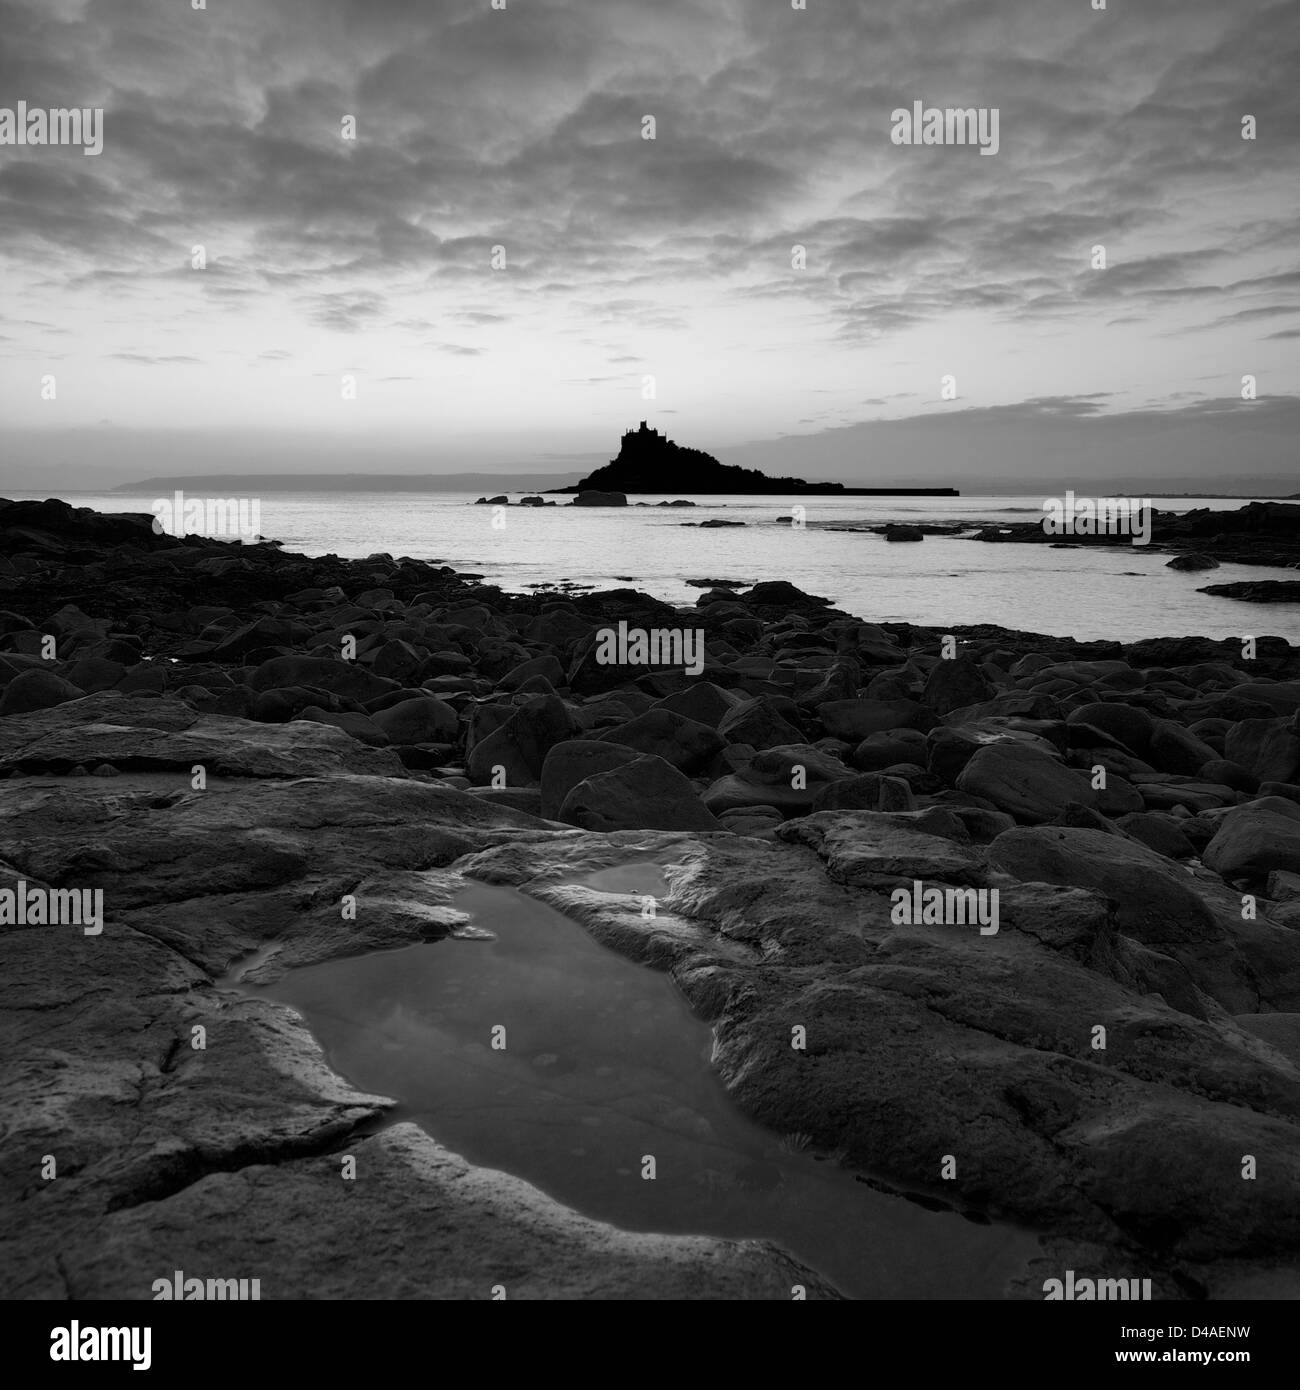 St michaels mount cornish Black and White Stock Photos & Images - Alamy